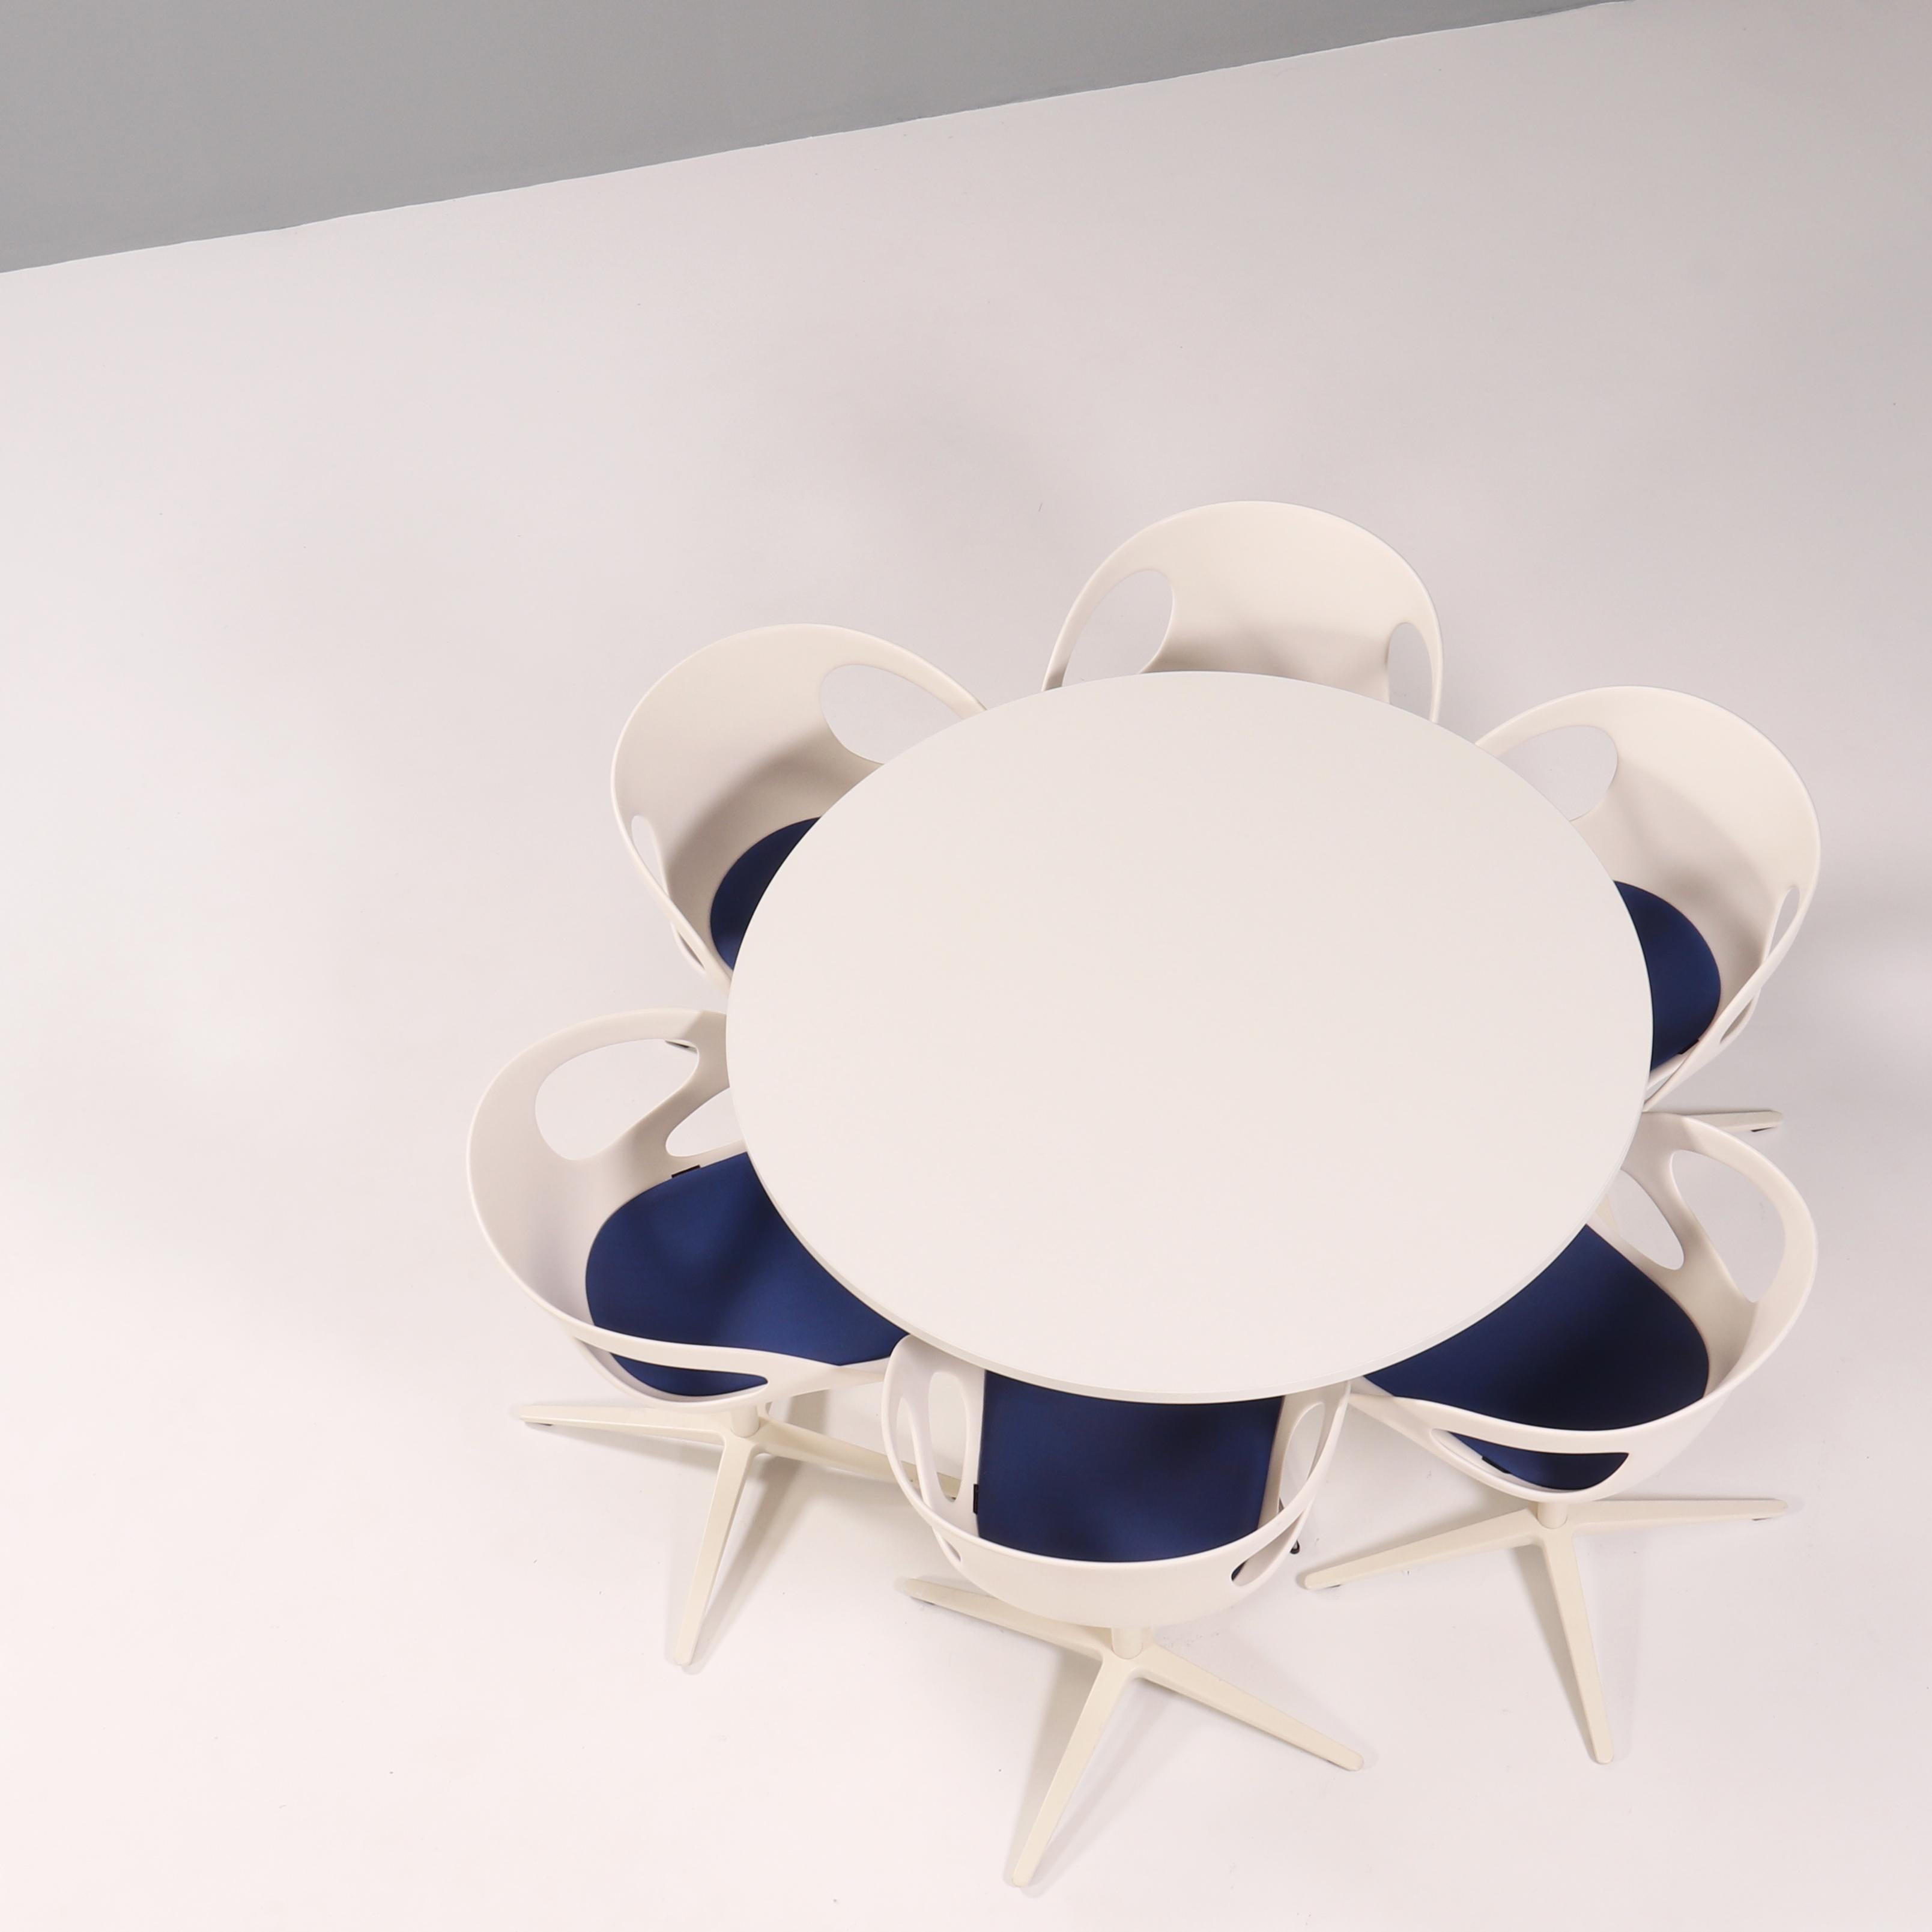 Table: 
Originally designed by Arne Jacobsen for Fritz Hansen, the Circular table is a true design classic.

The table features the original iconic star base that Jacobsen used in some of his other designs such as the Swan Chair.

The table